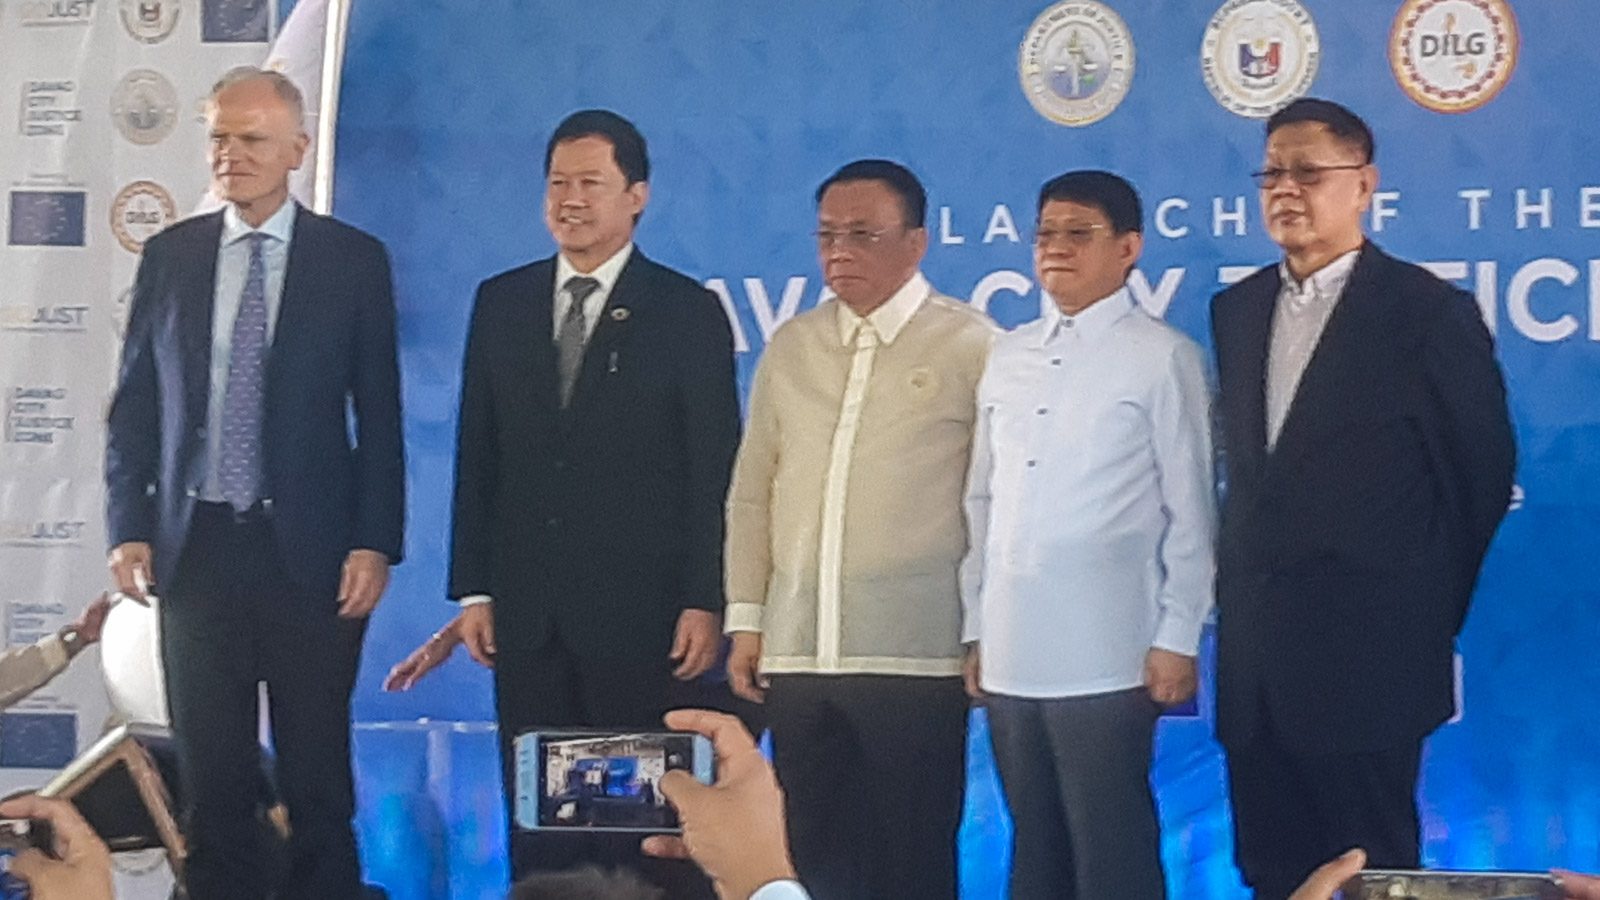 Davao City selected as third Justice Zone in the Philippines